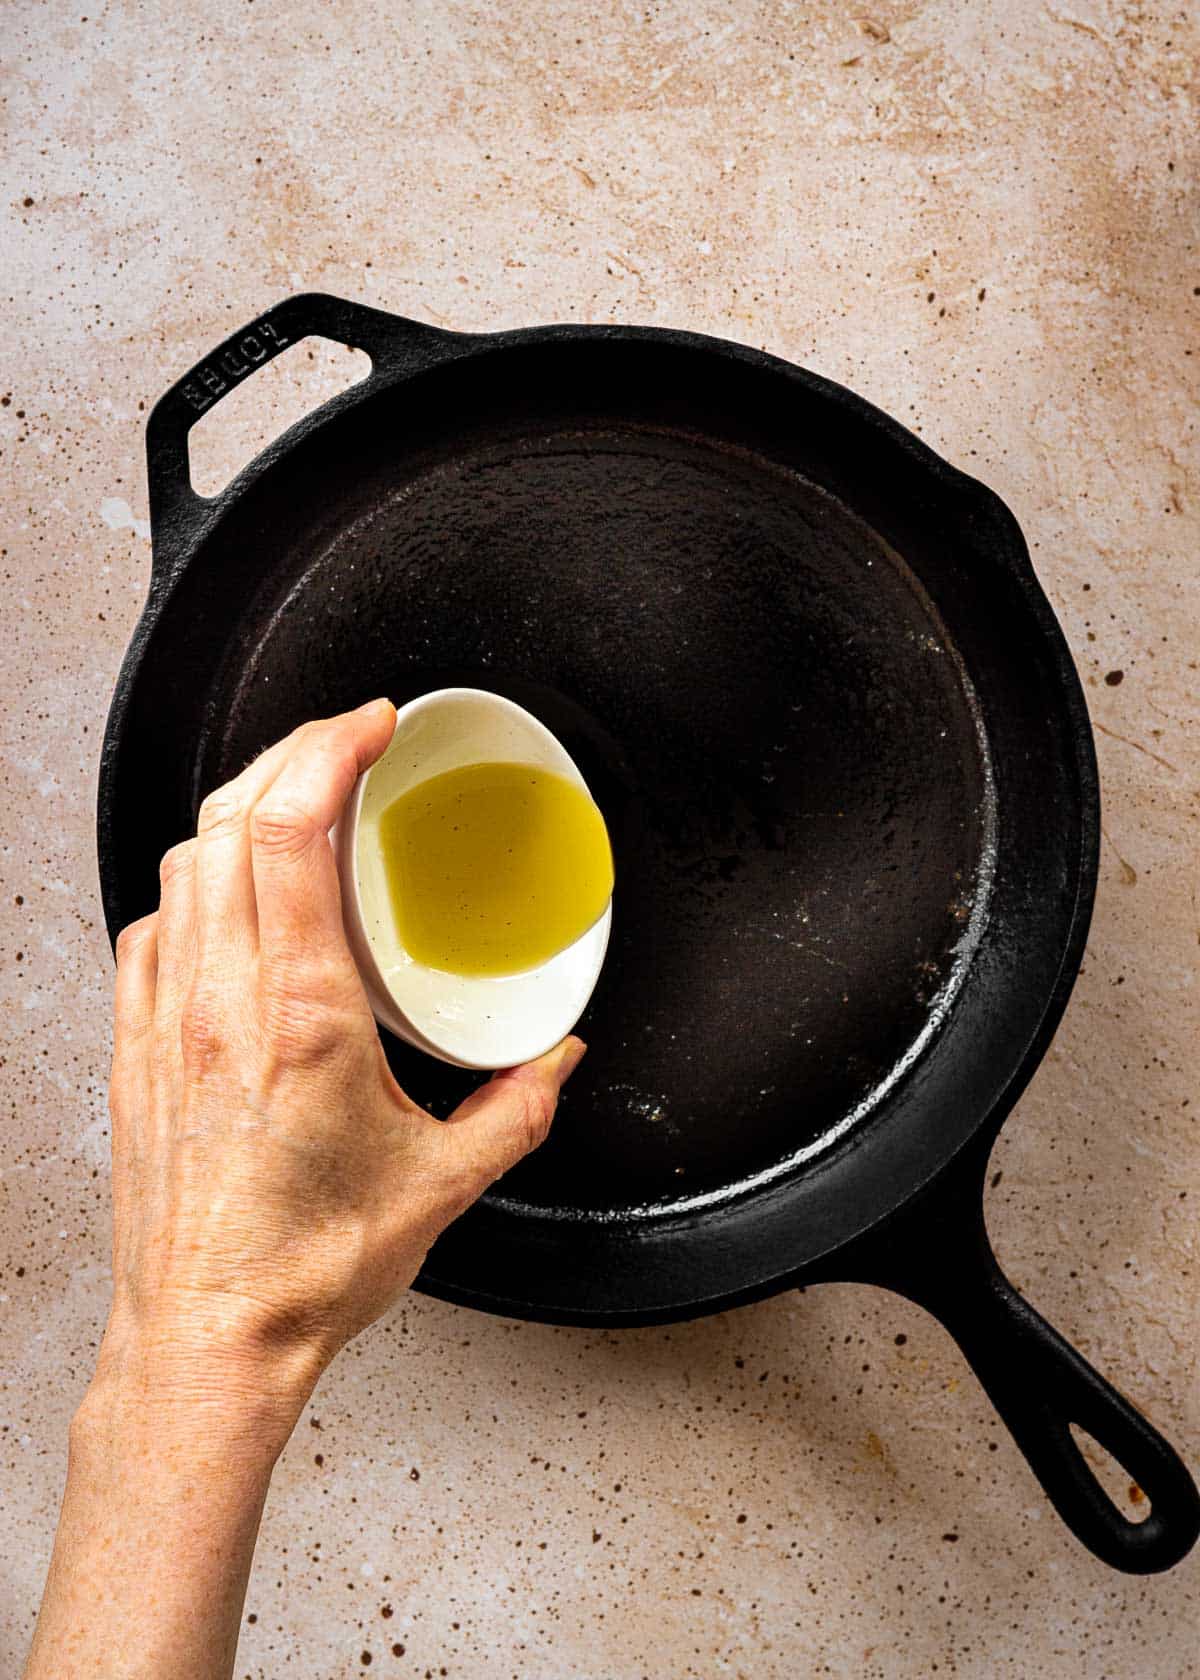 Oil being poured into cast iron pan.